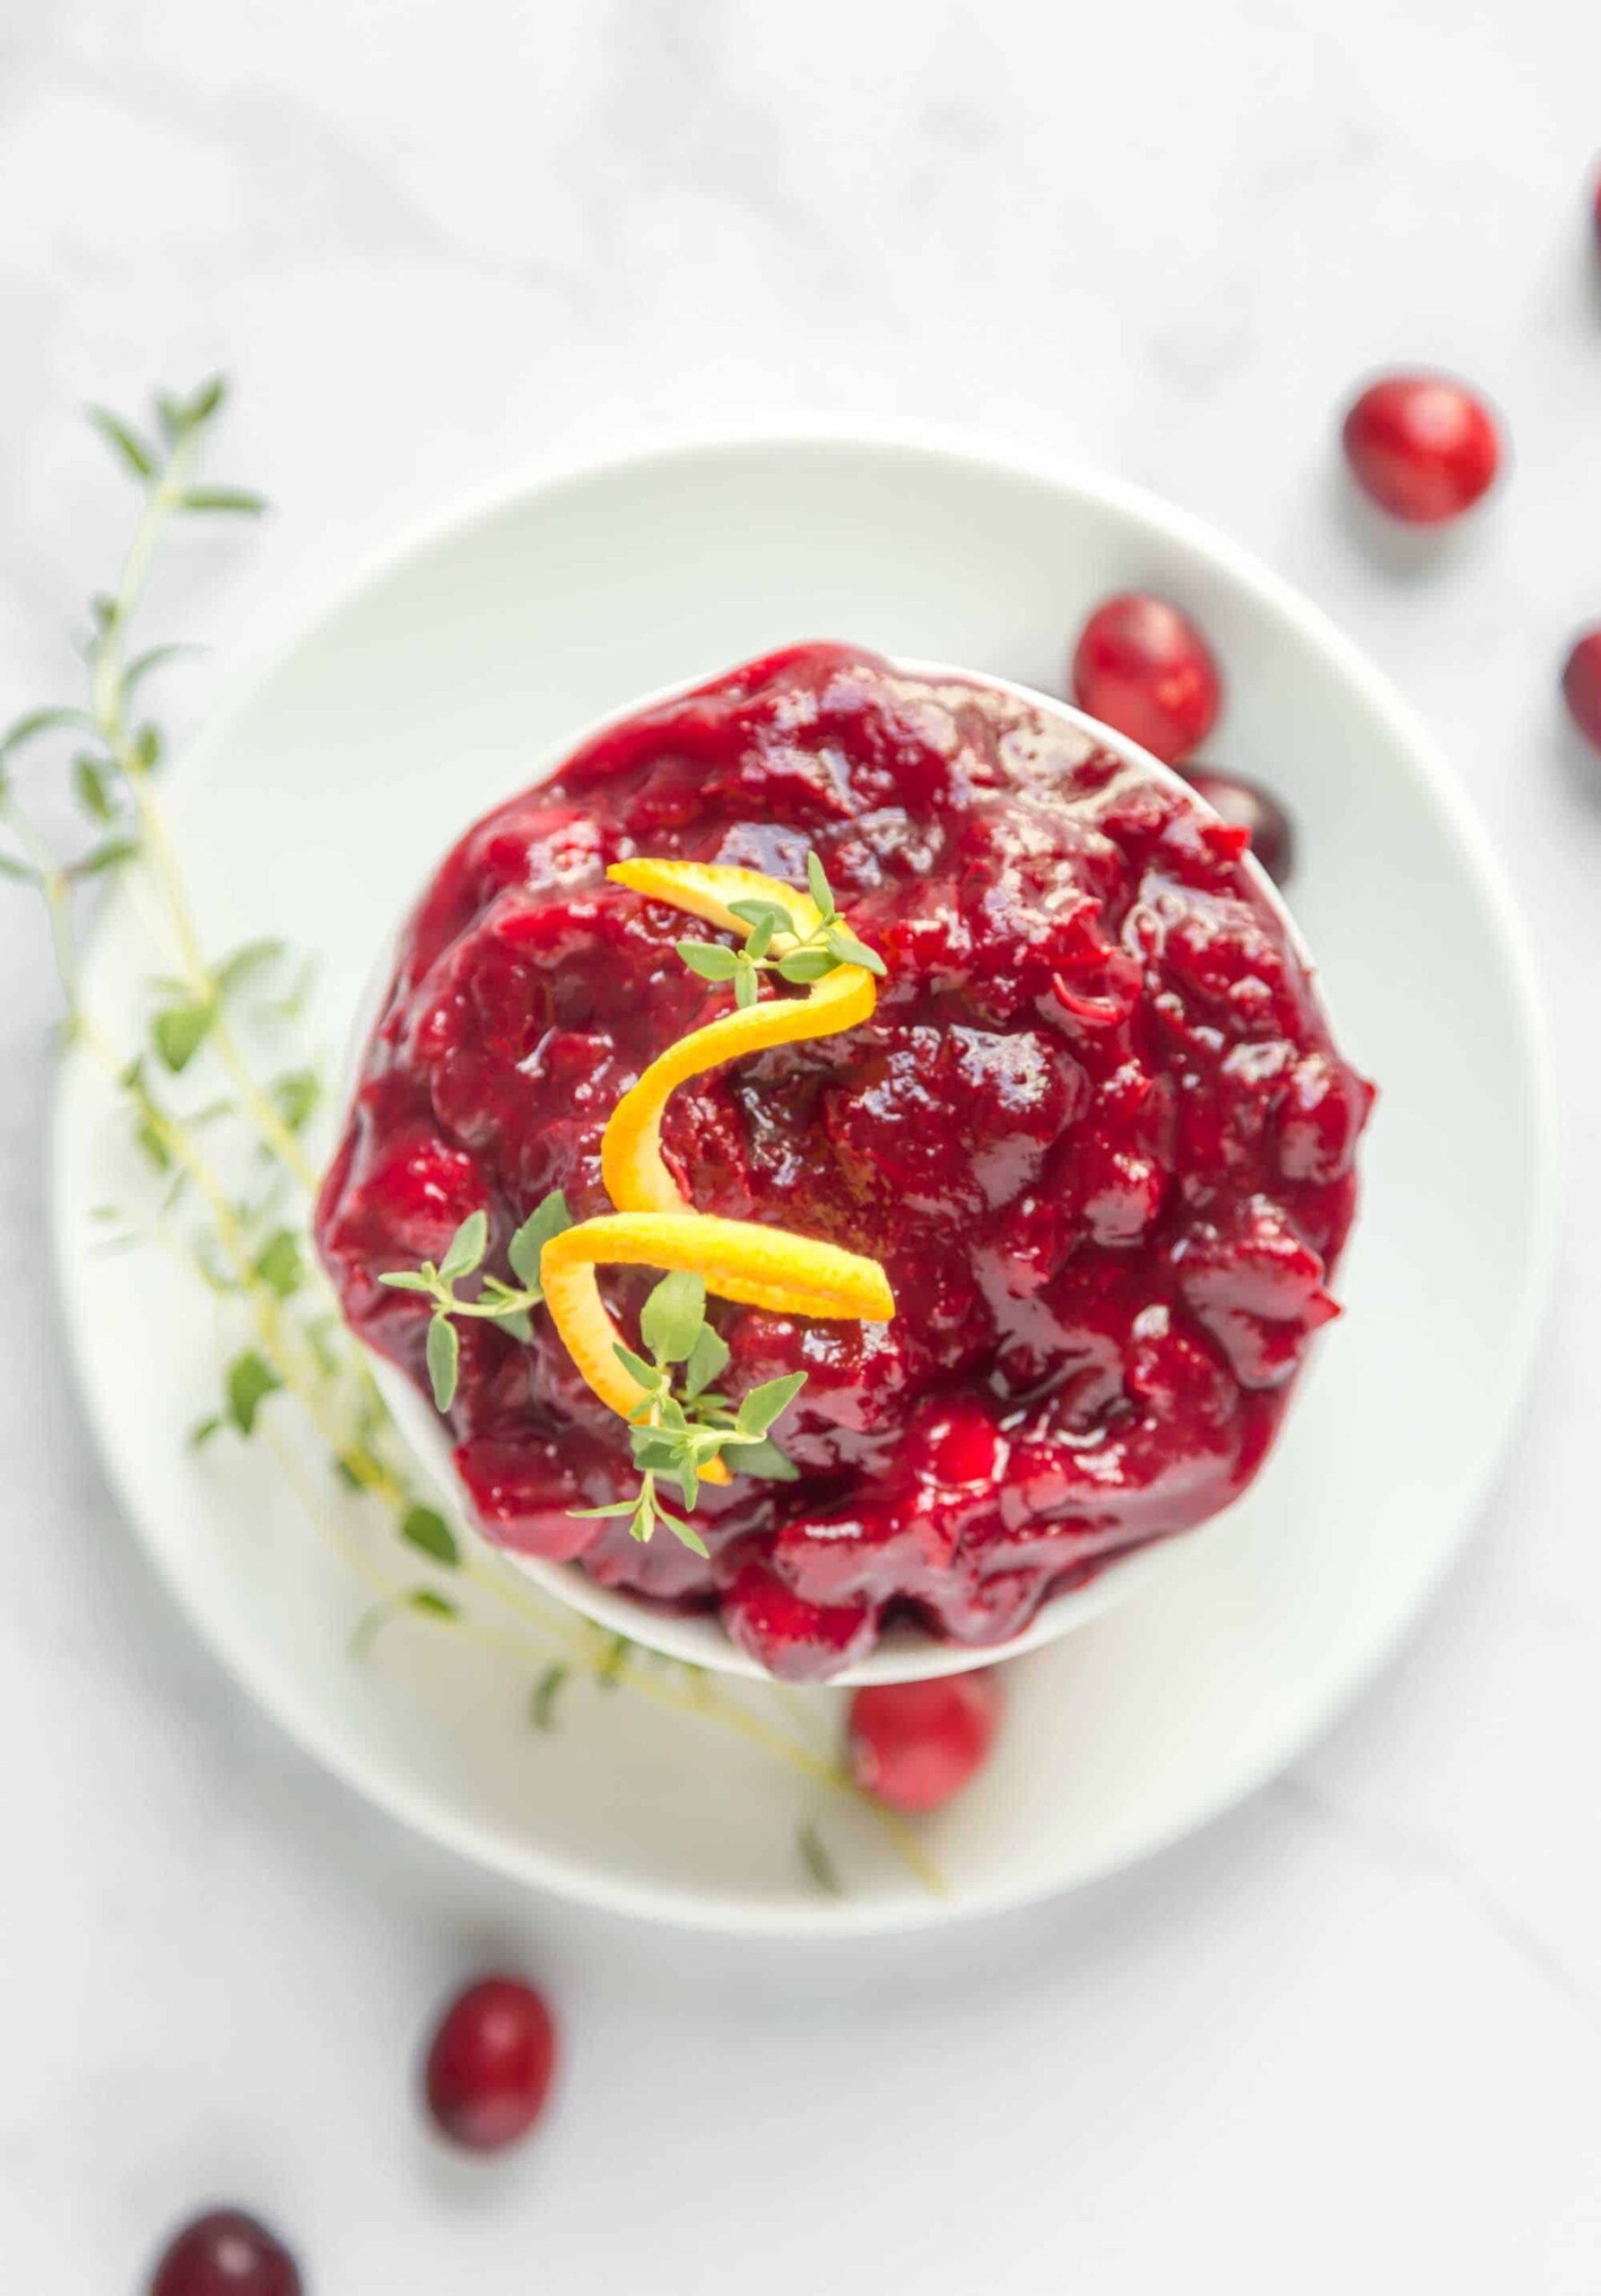 Cranberry sauce in a bowl topped with a spiraled orange peel.